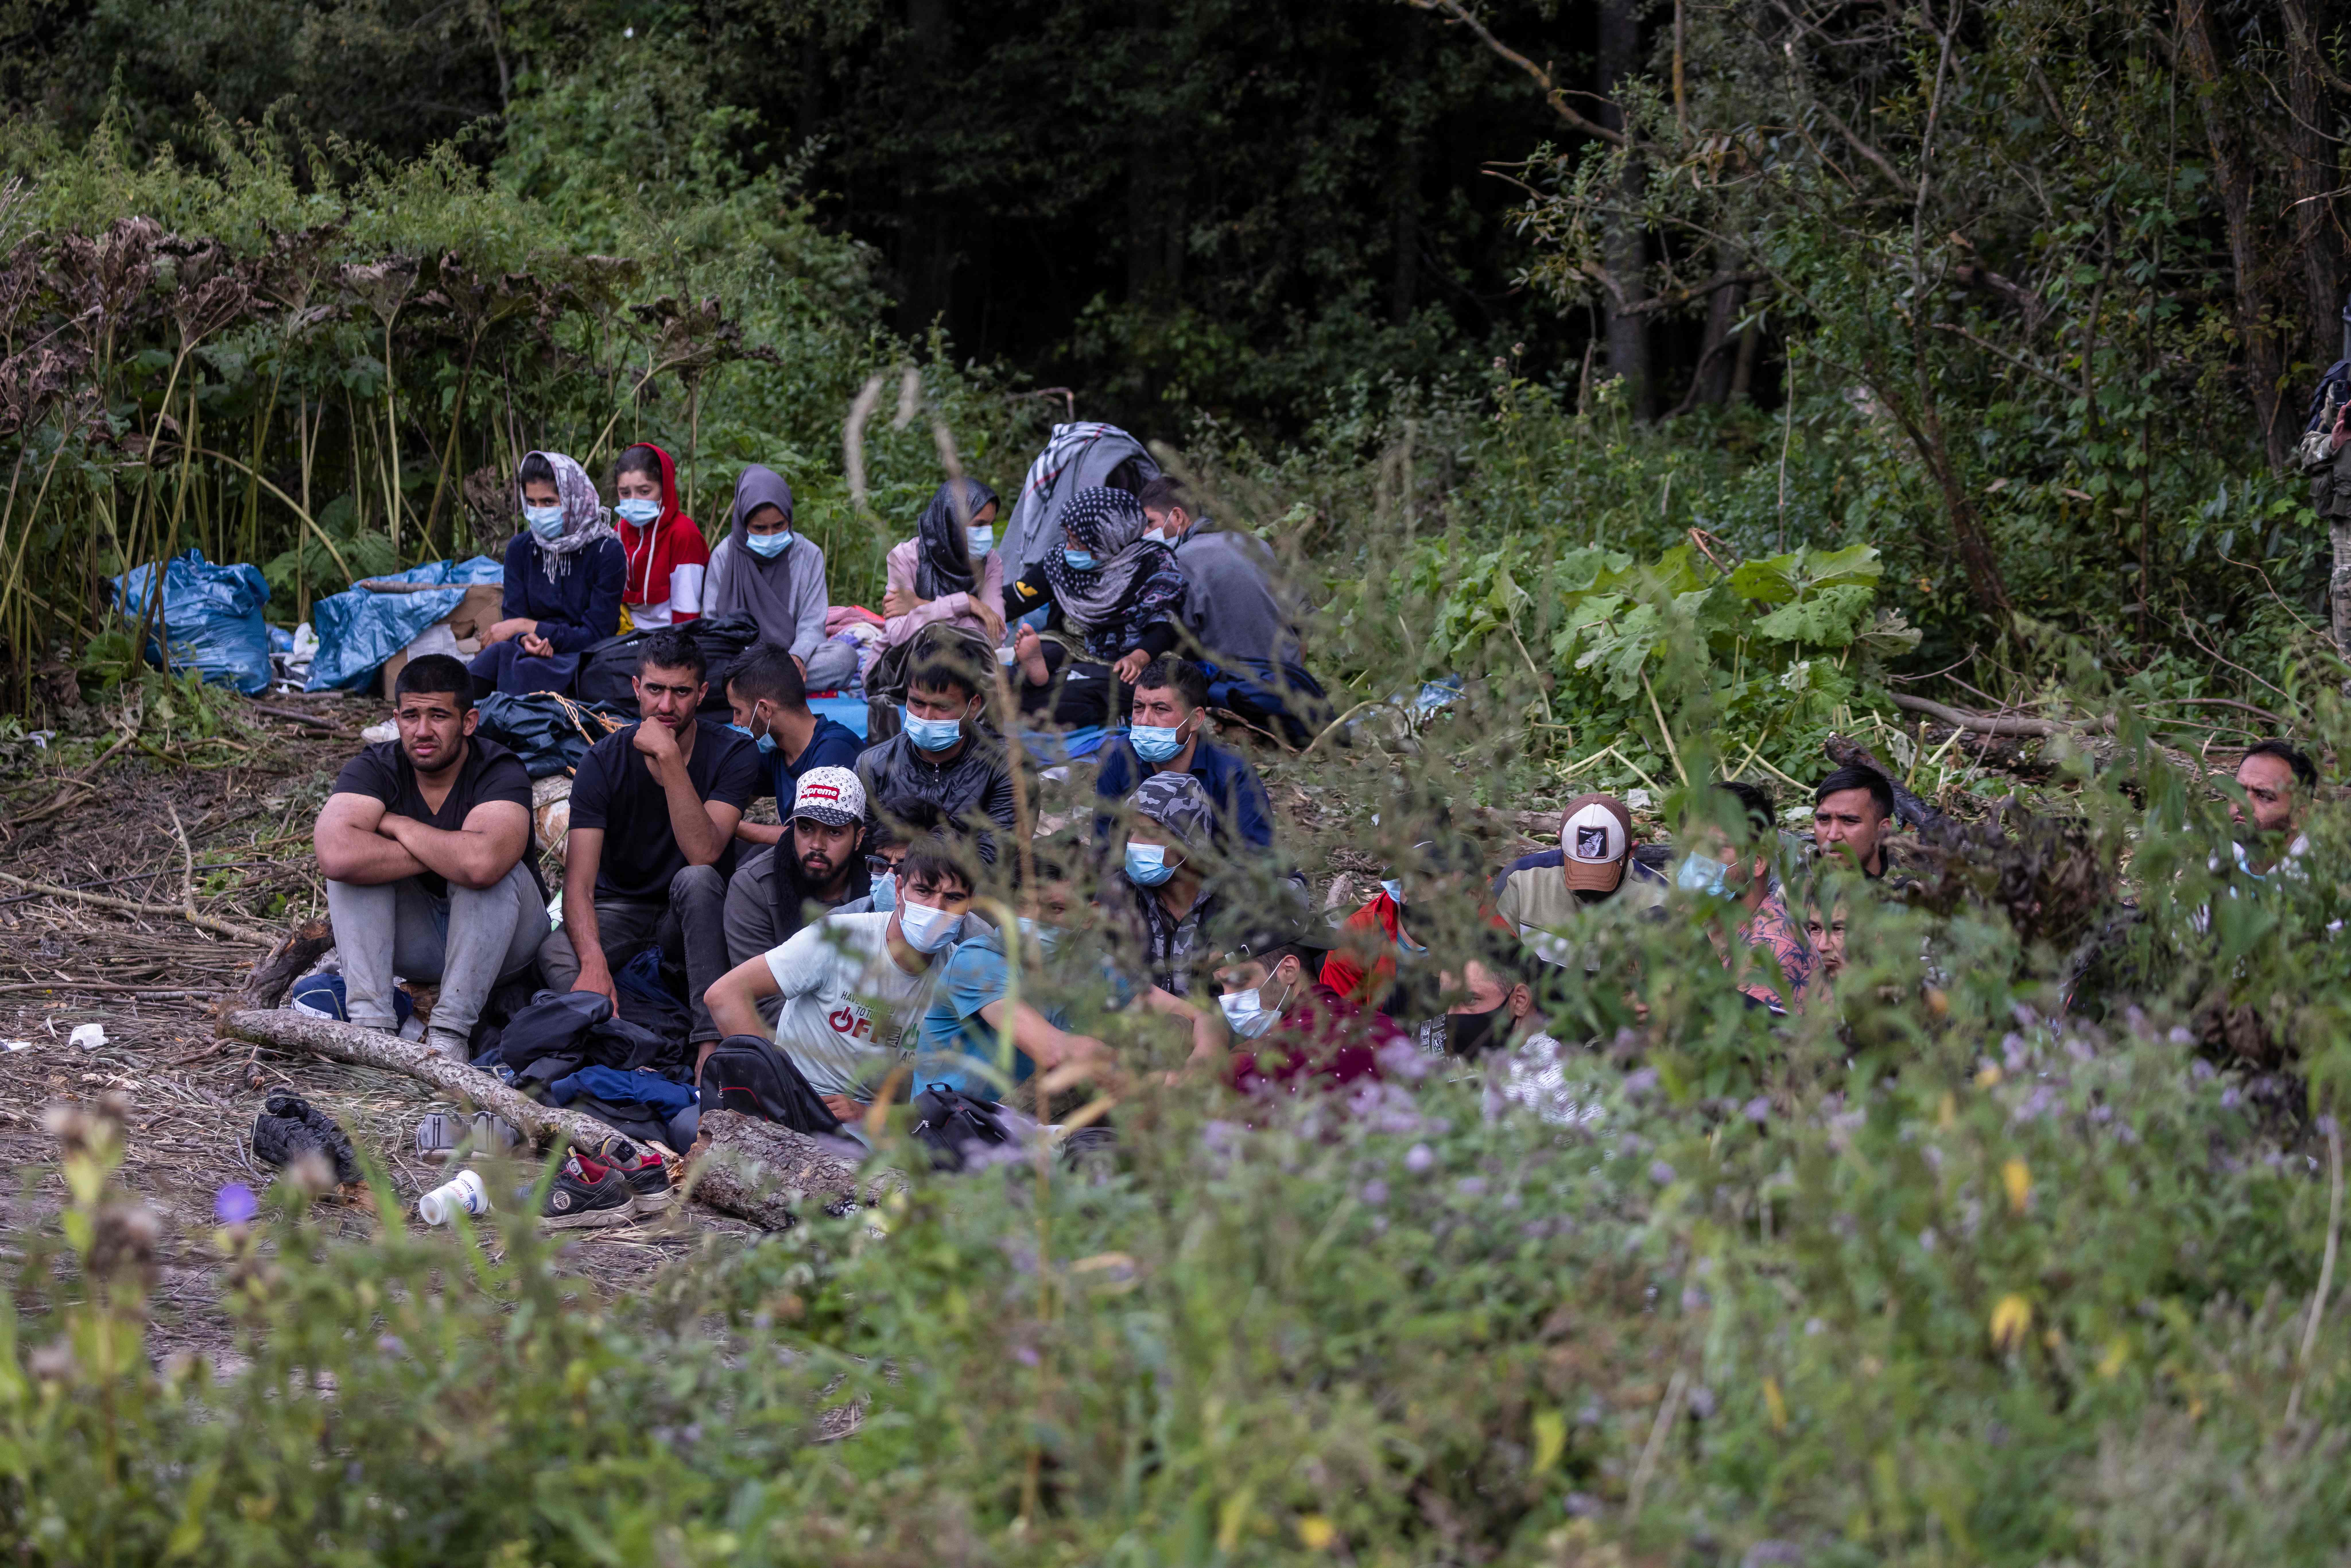 Migrants believed to be from Afghanistan sit at the border between Belarus and Poland near the village of Usnarz Gorny on 20 August 2021